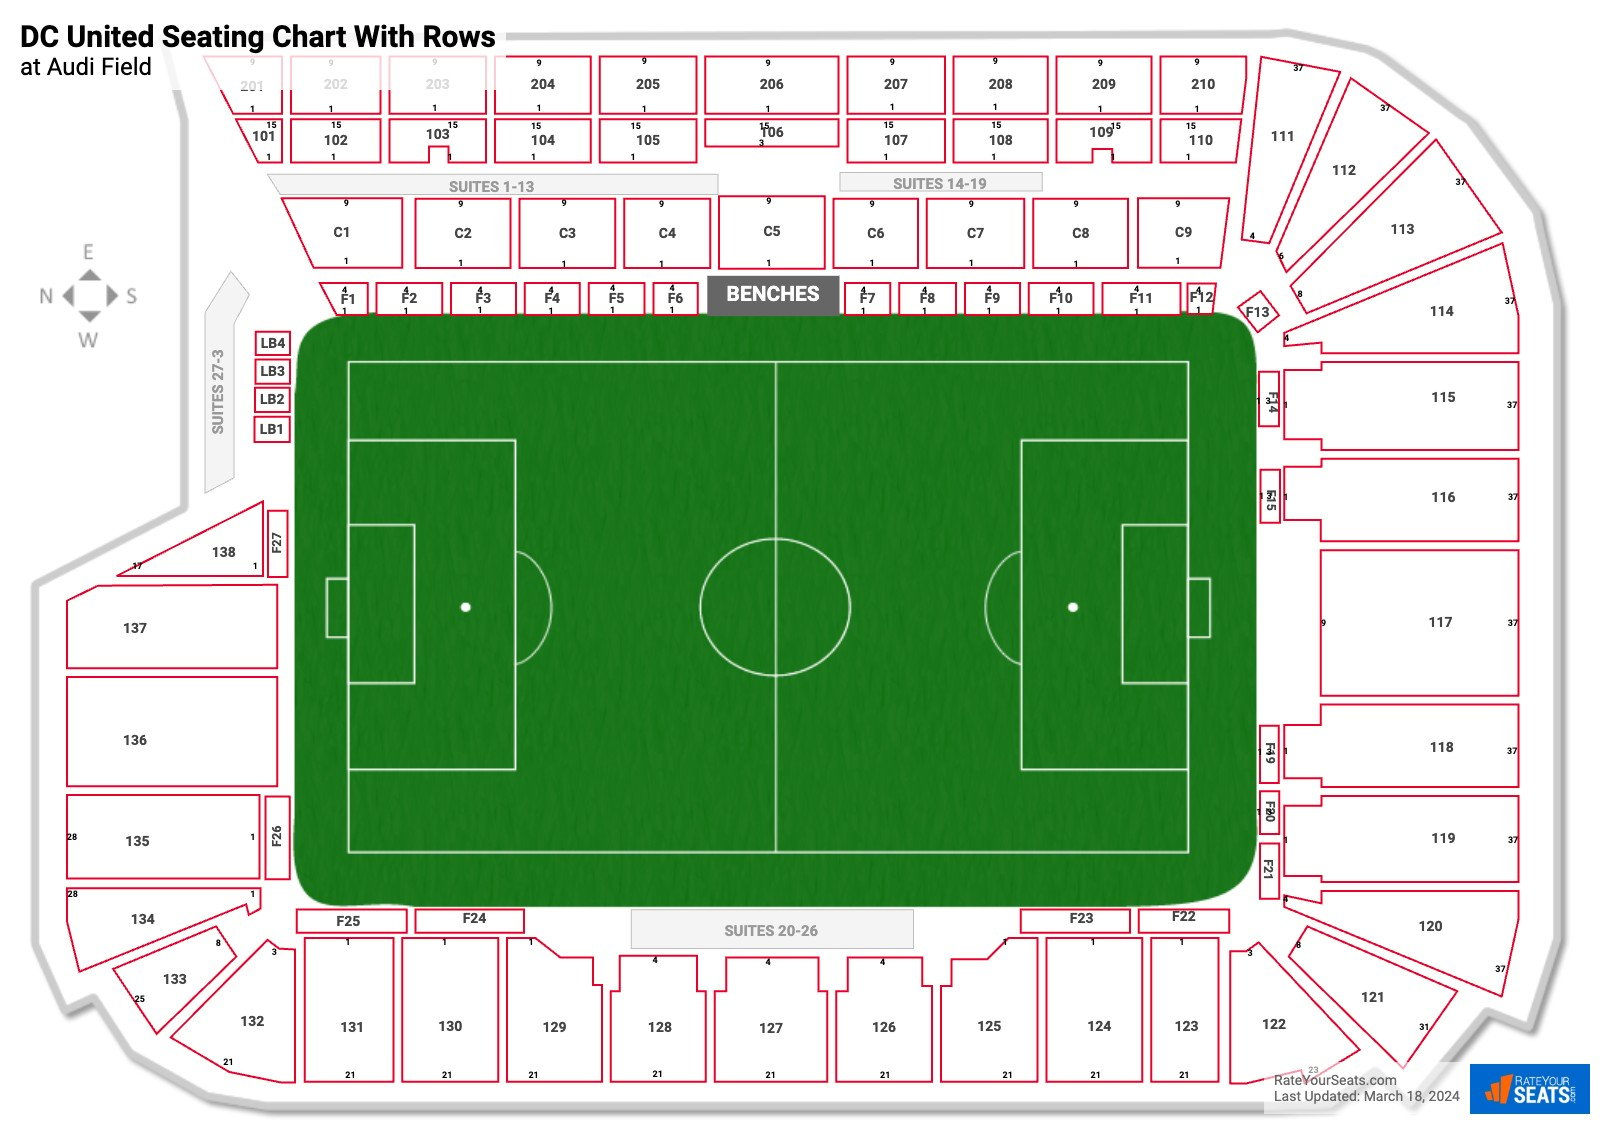 Audi Field seating chart with row numbers